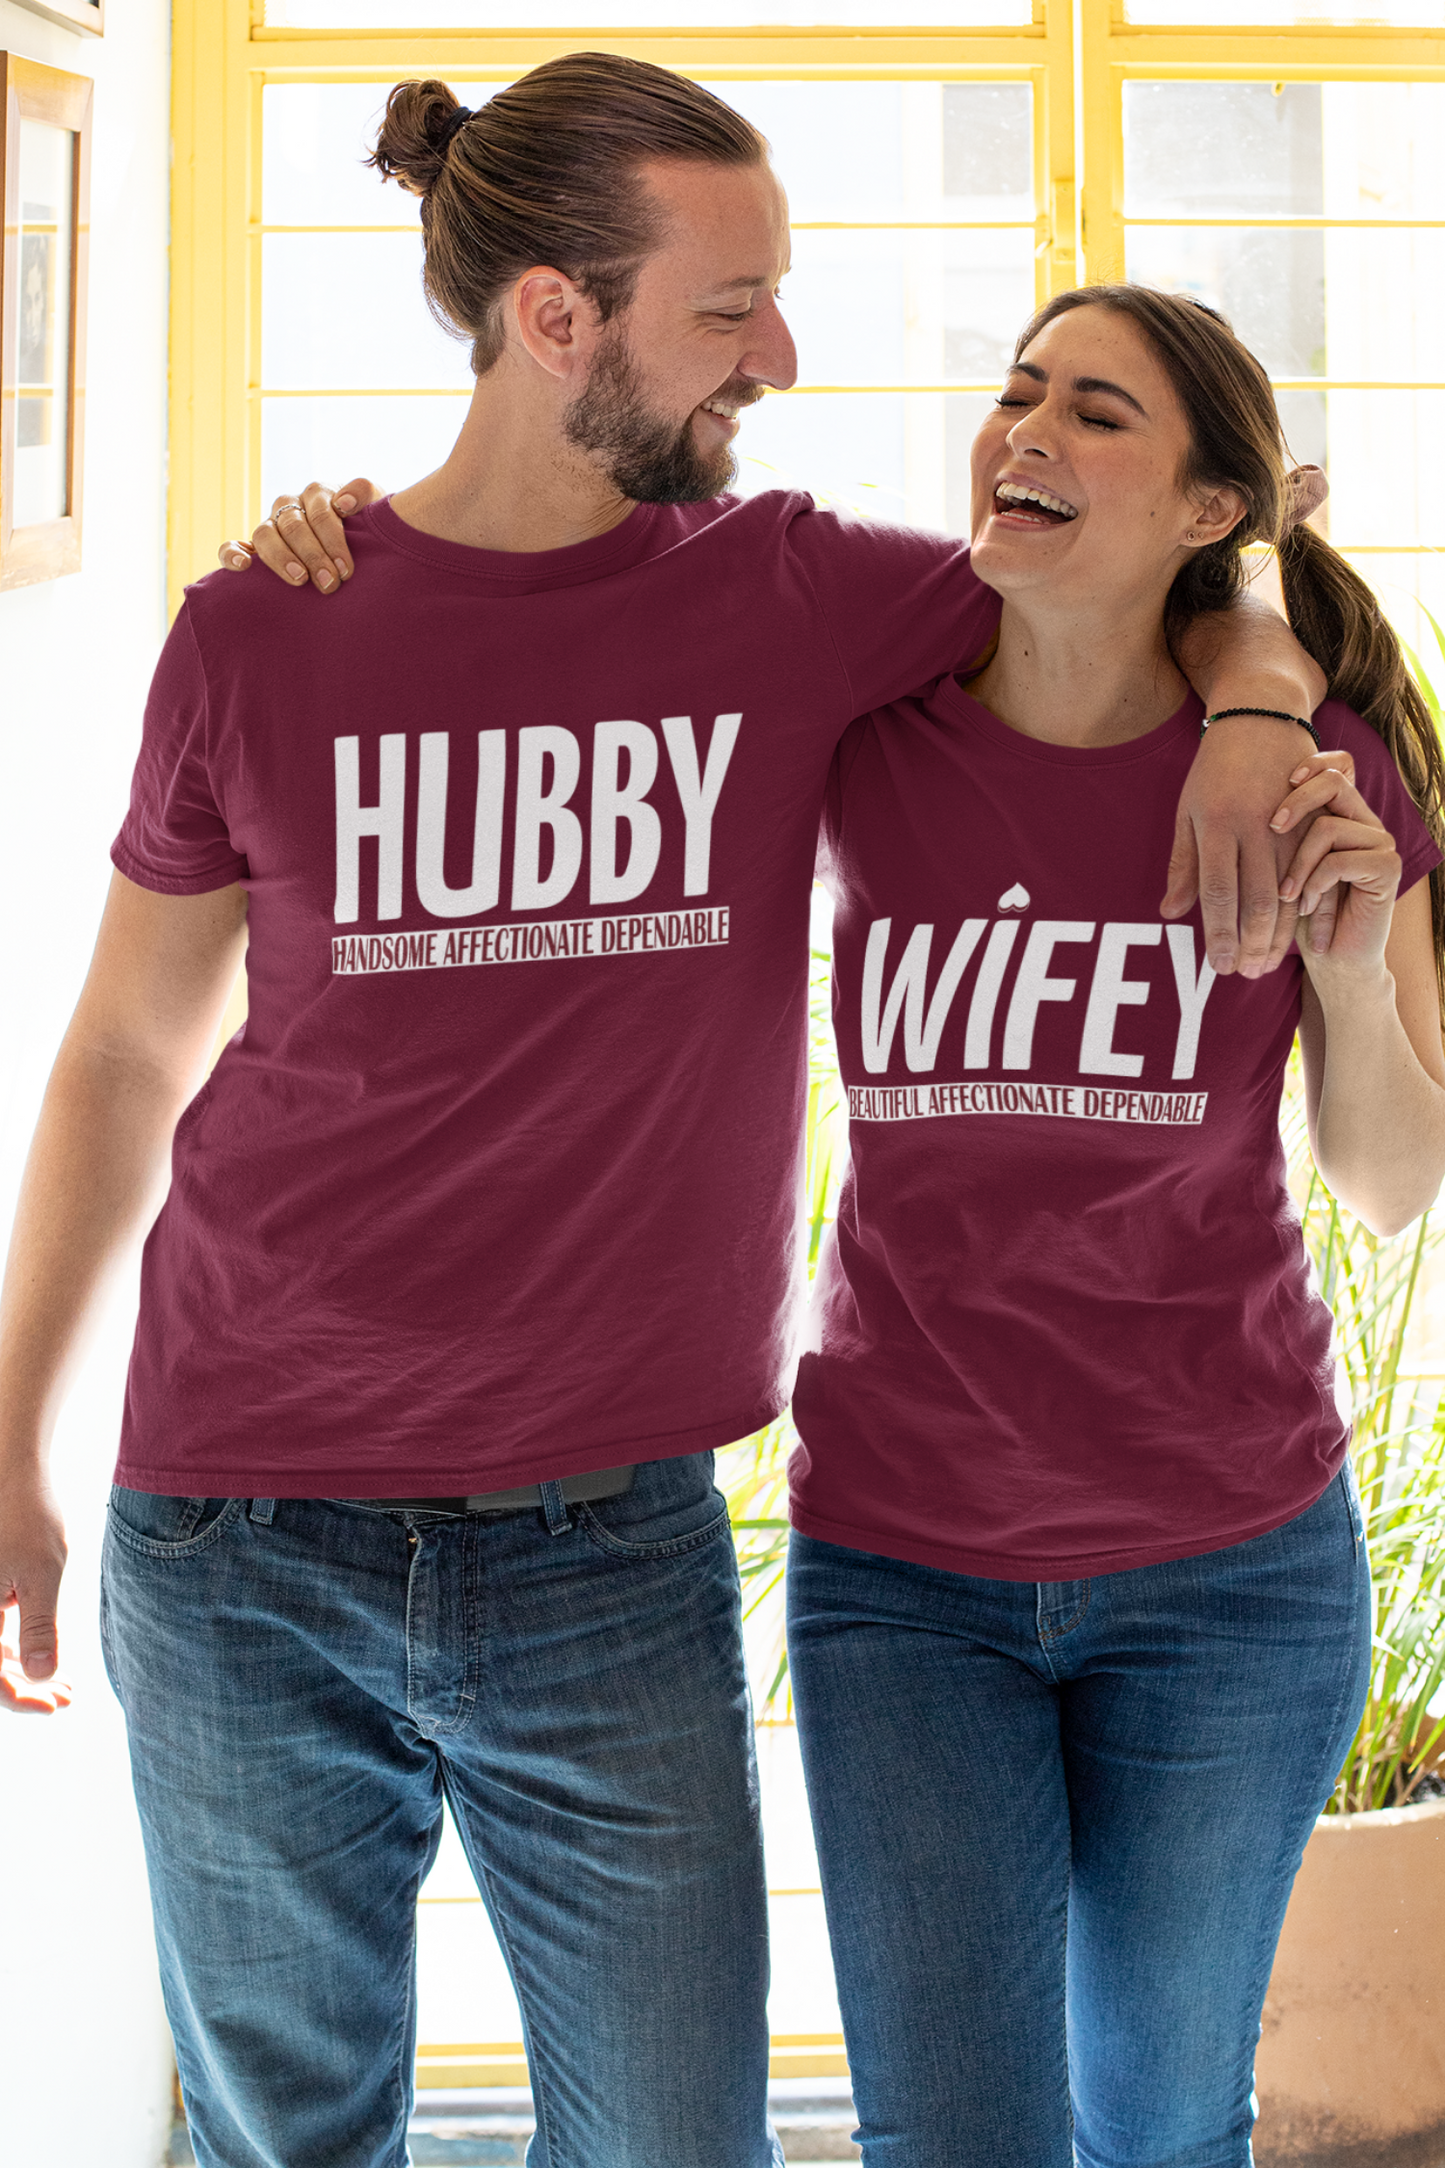 Hubby Wifey Couple T-shirt online in India - nautunkee.com | Valentine's Day gift ideas for hubby and wife